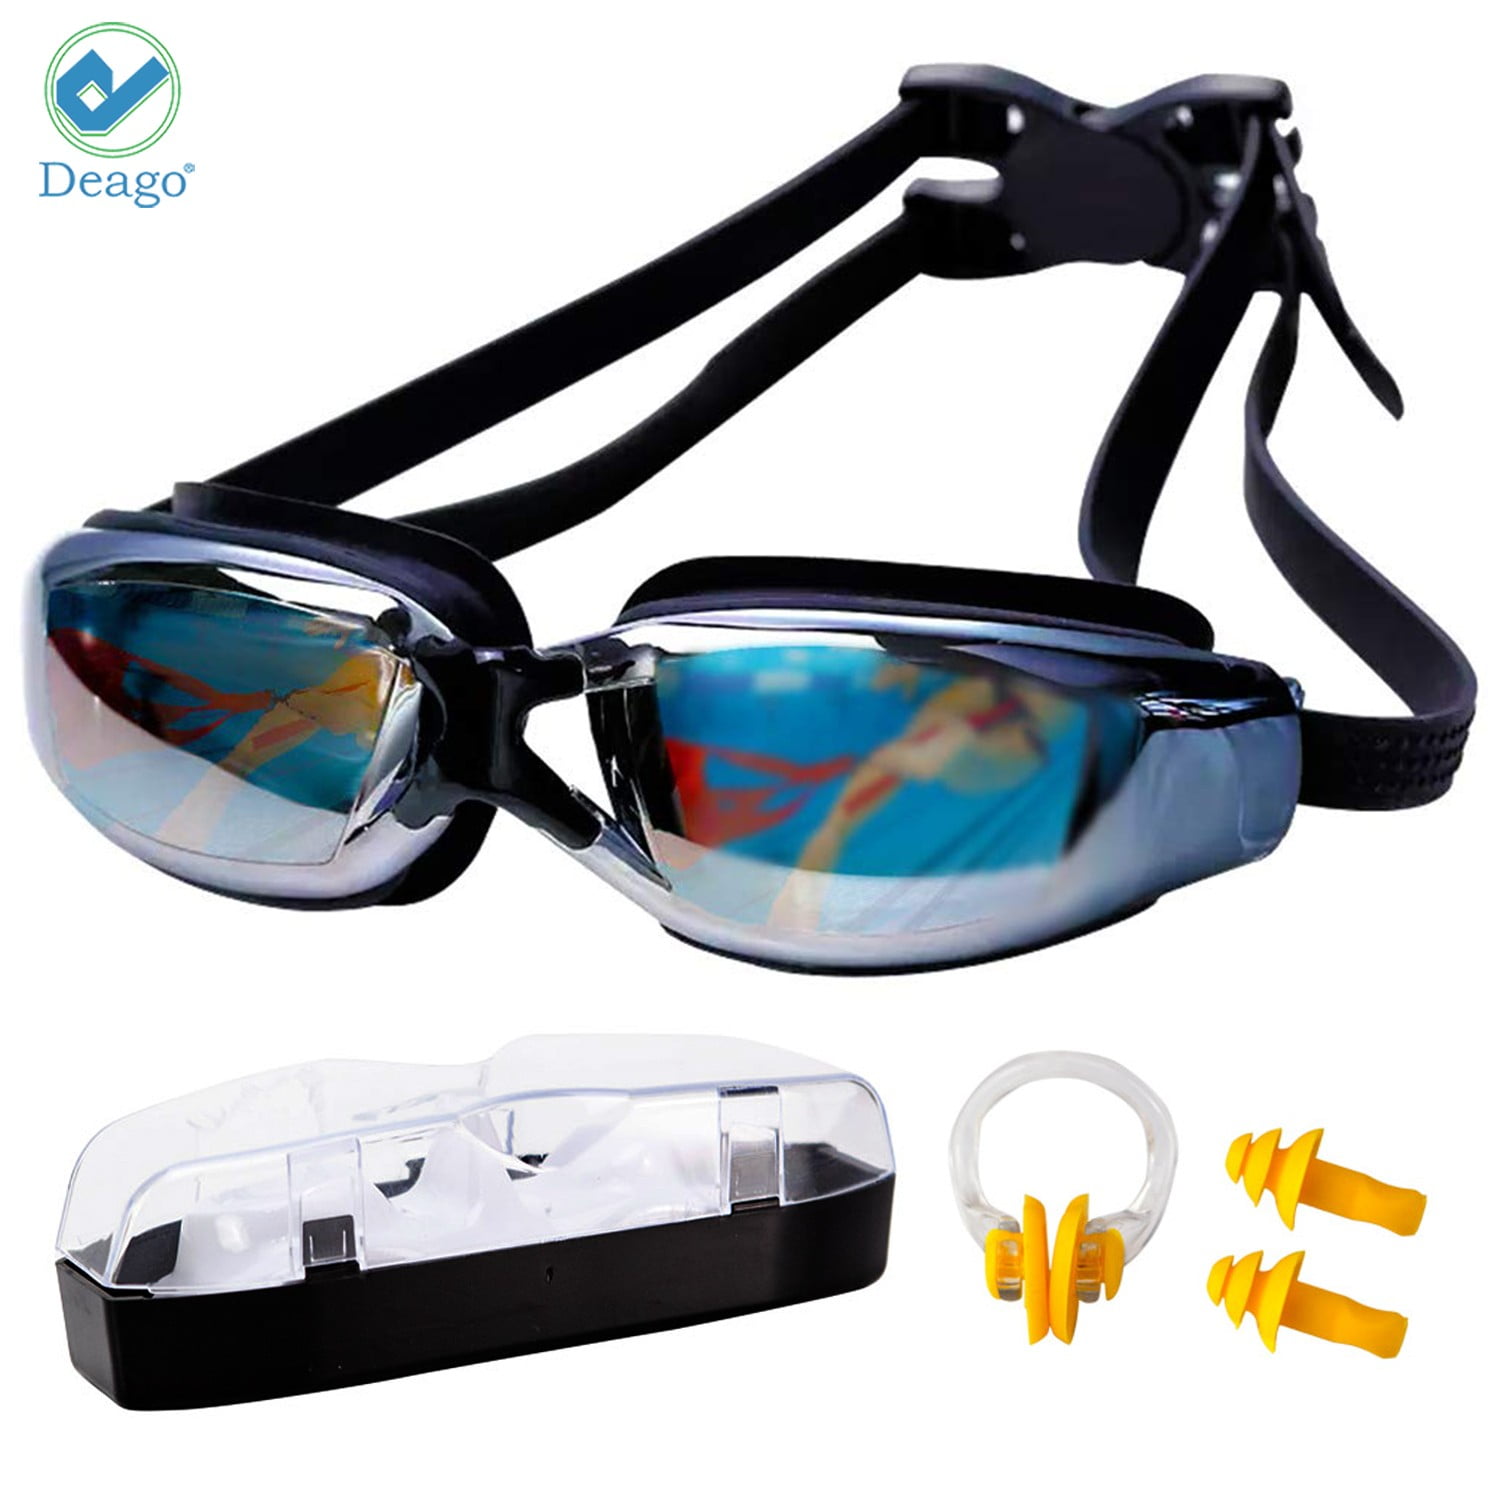 Details about   Adult Anti-fog Swimming Goggles Glass Swim Eyewear Glasses Protection with Case 